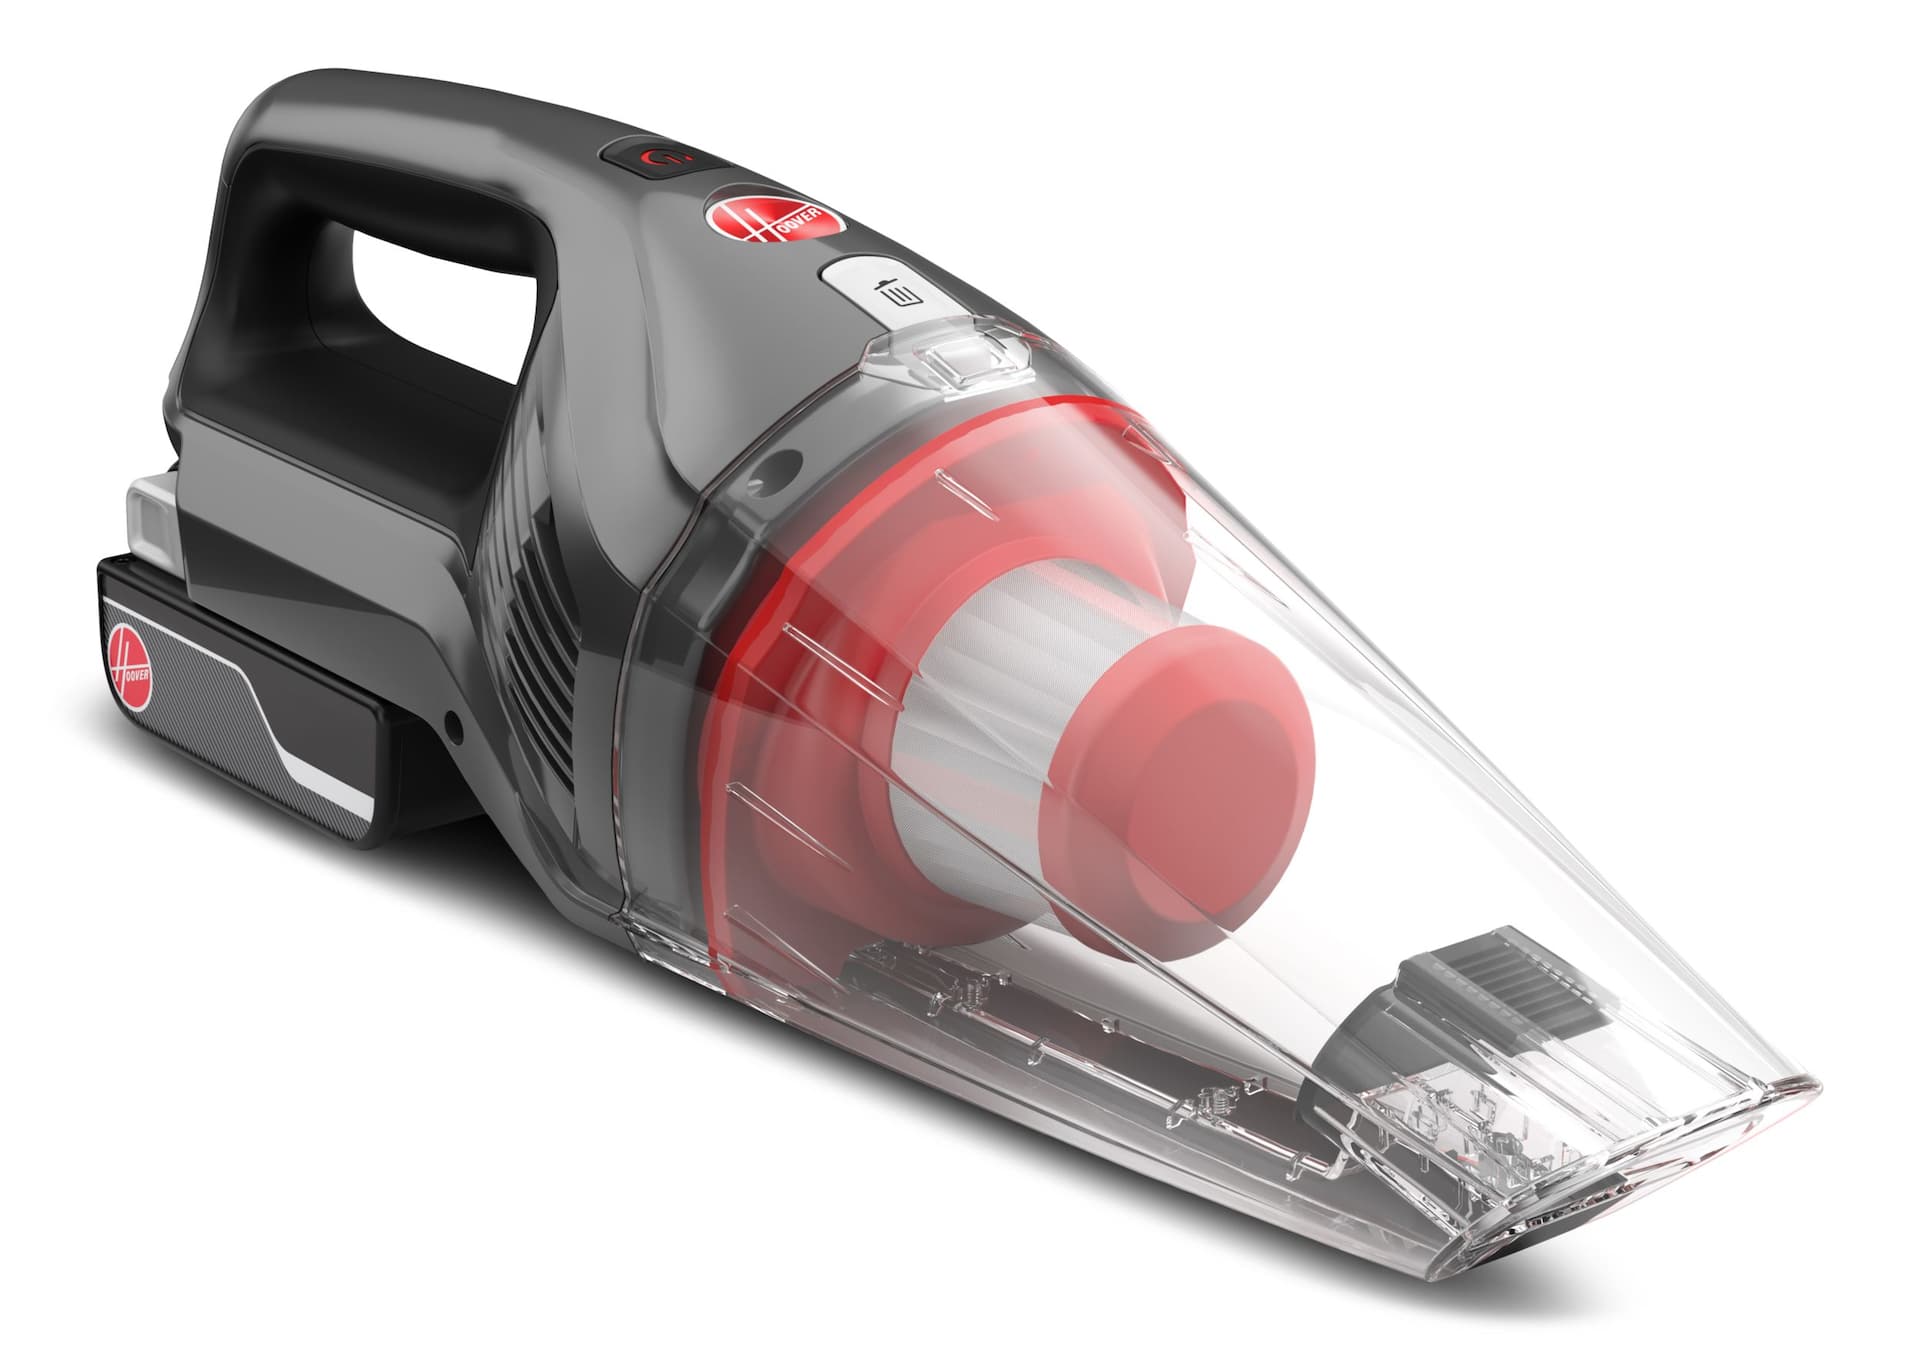 Hoover ONEPWR 20V Cordless Hand Vacuum | Canadian Tire